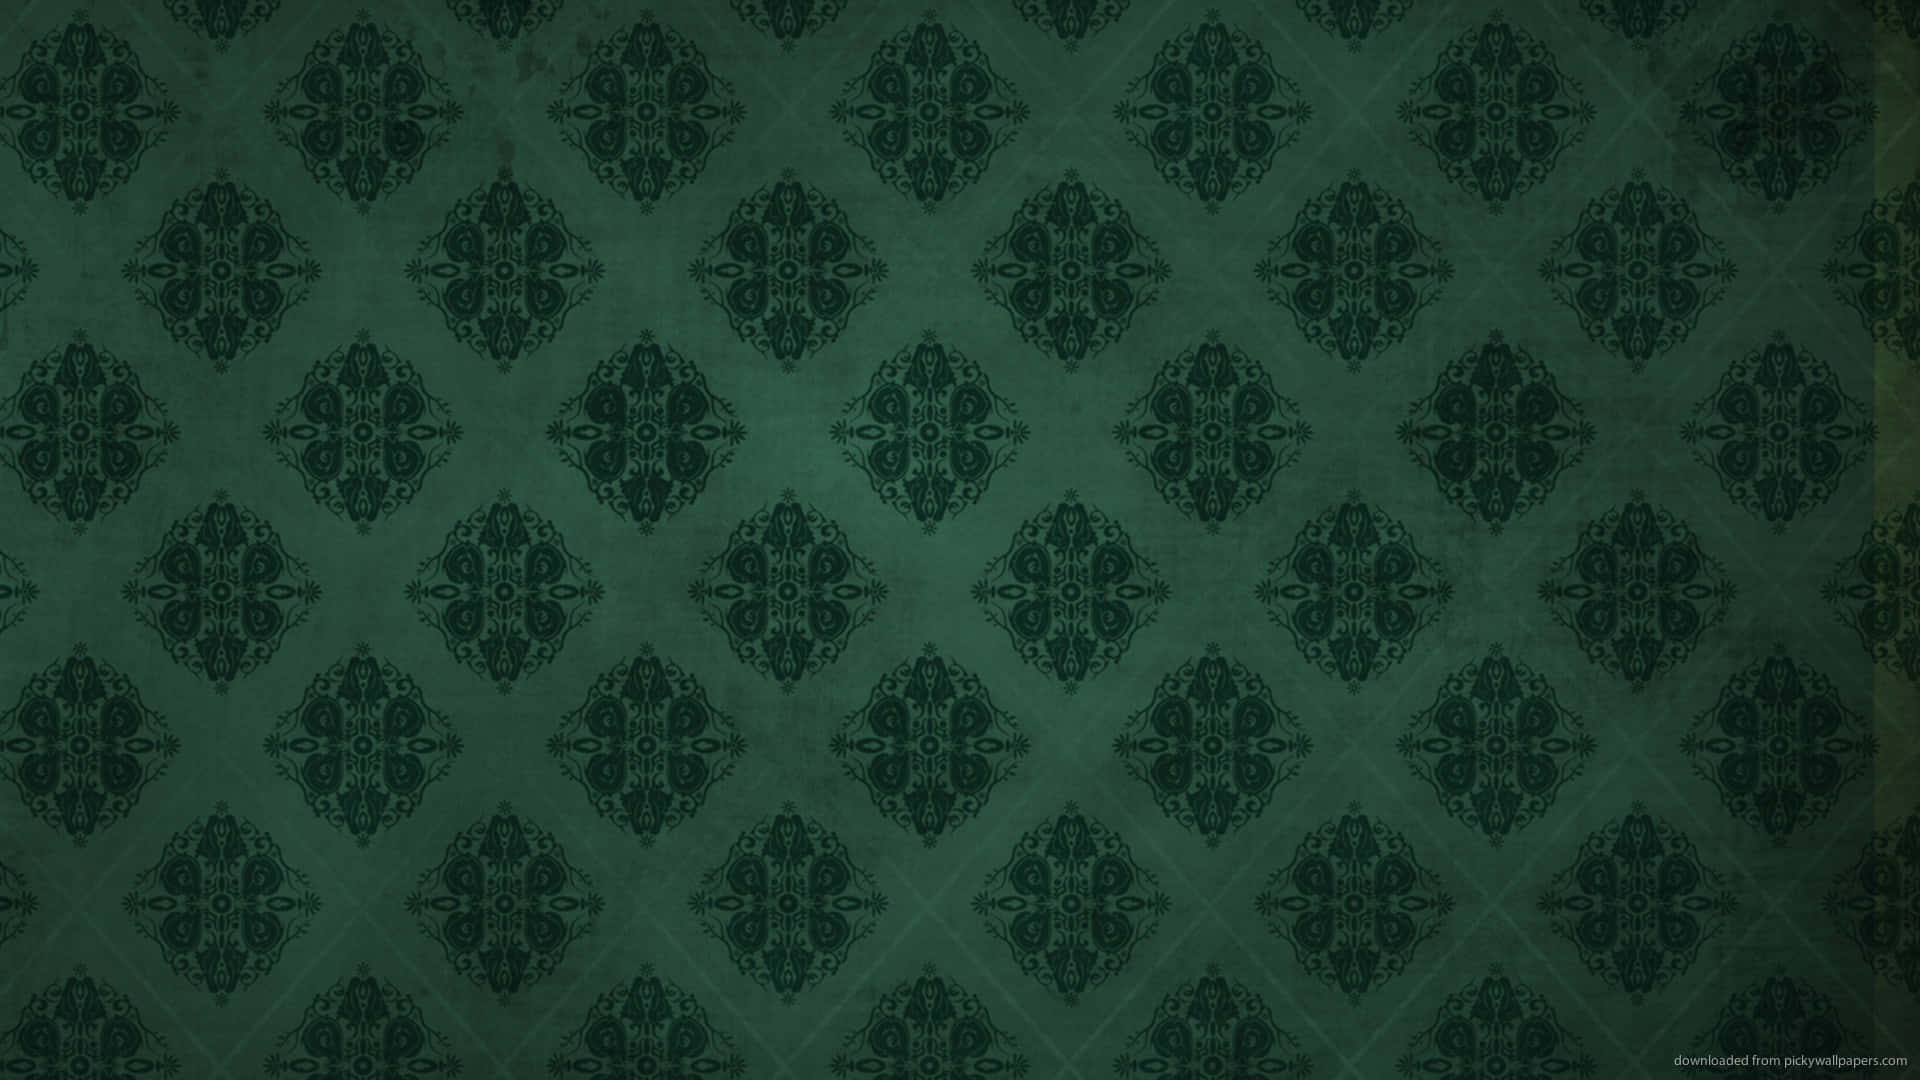 Brighten up your walls with this bold, green pattern wallpaper Wallpaper